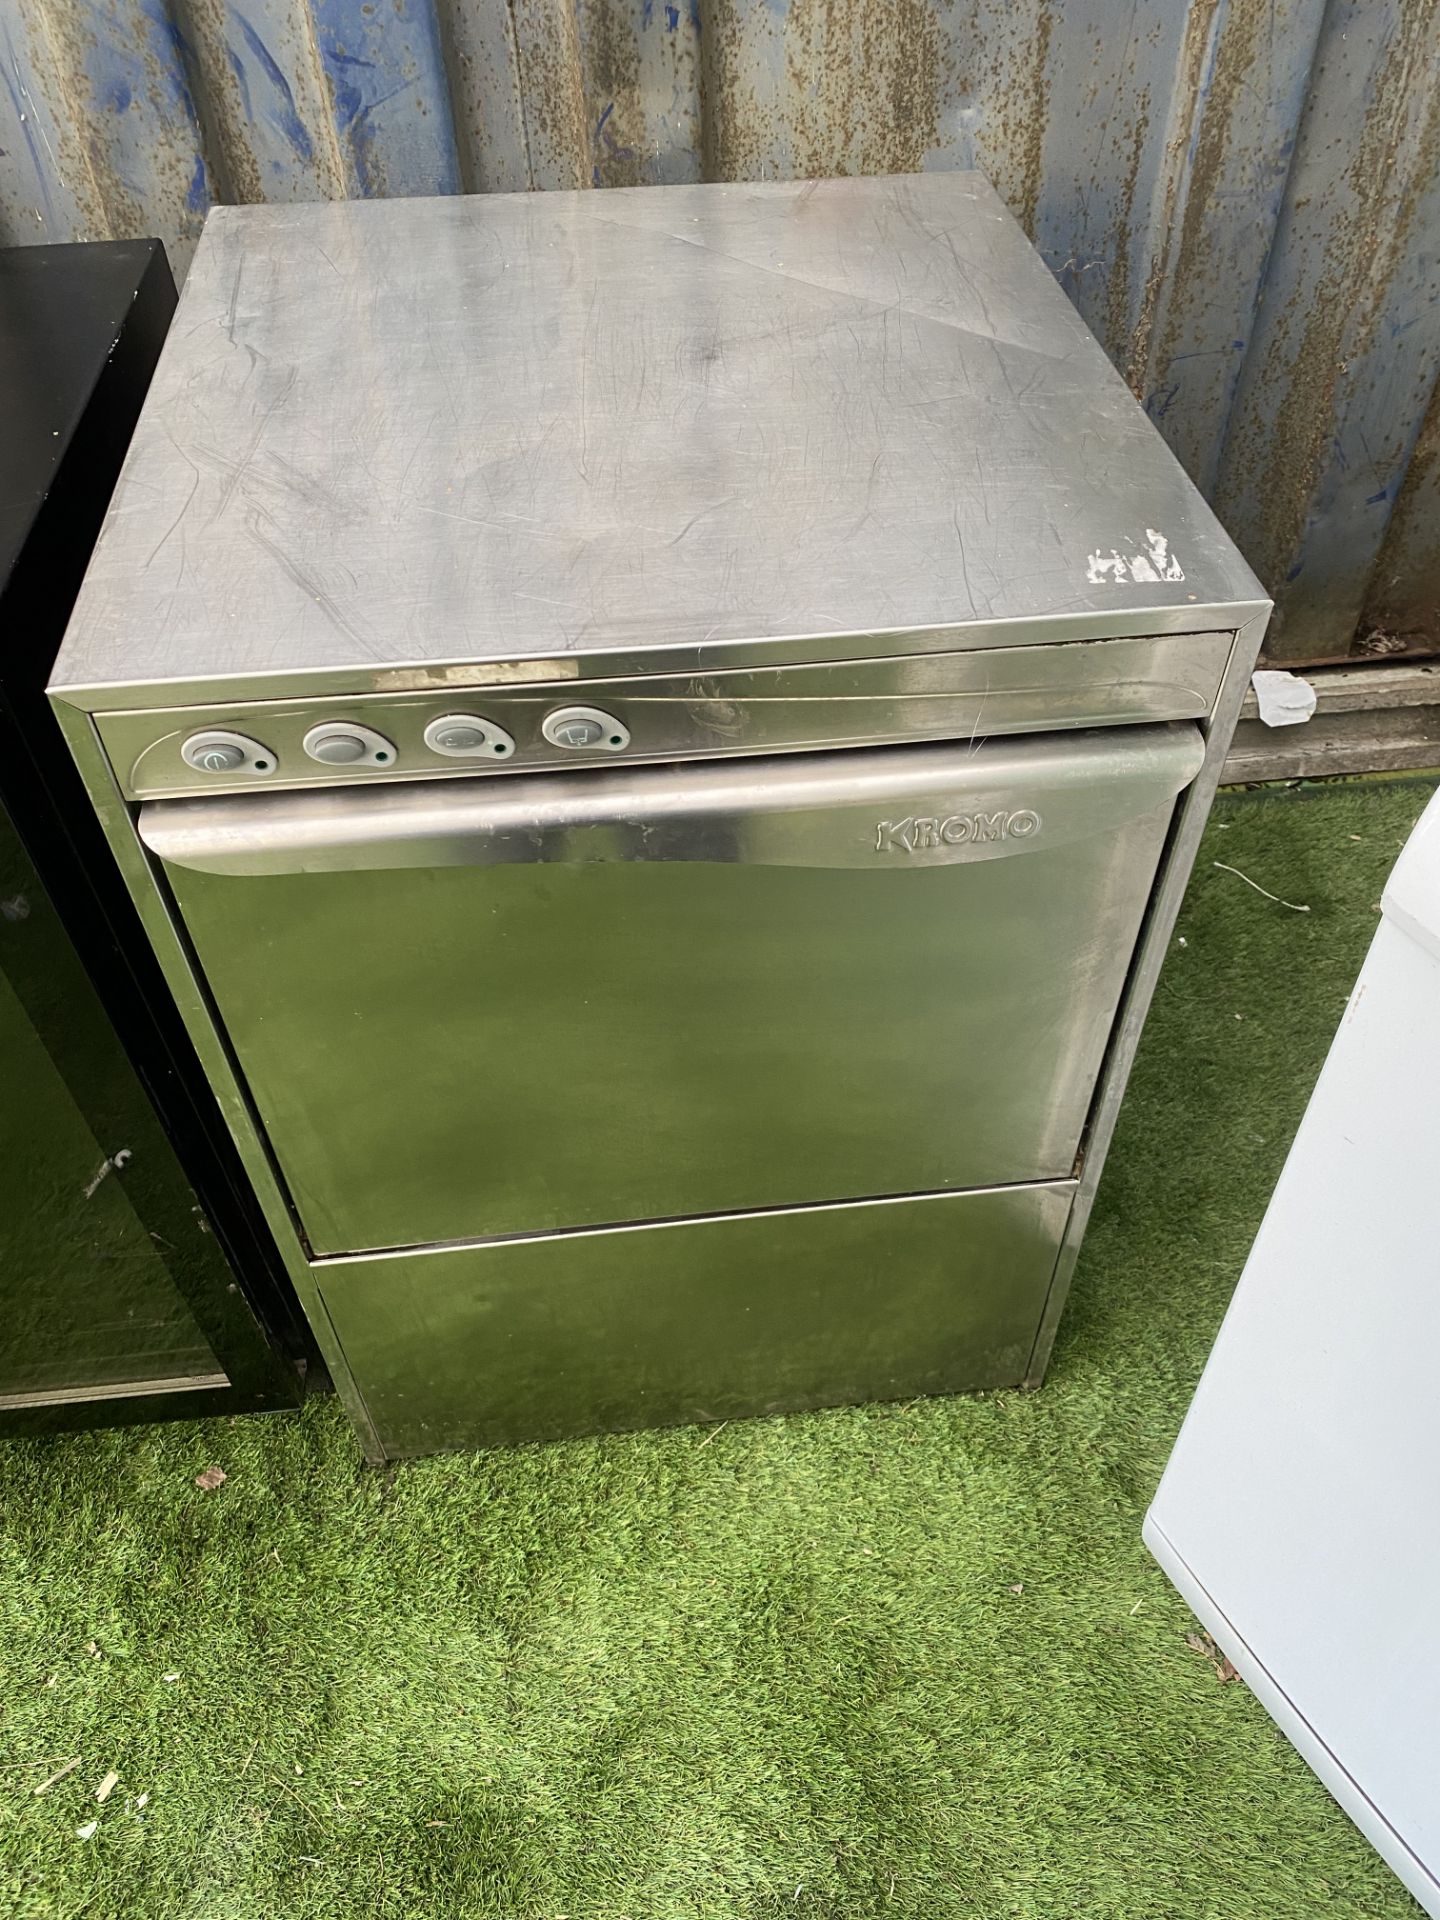 Stainless Steel Kromo Glass Washer